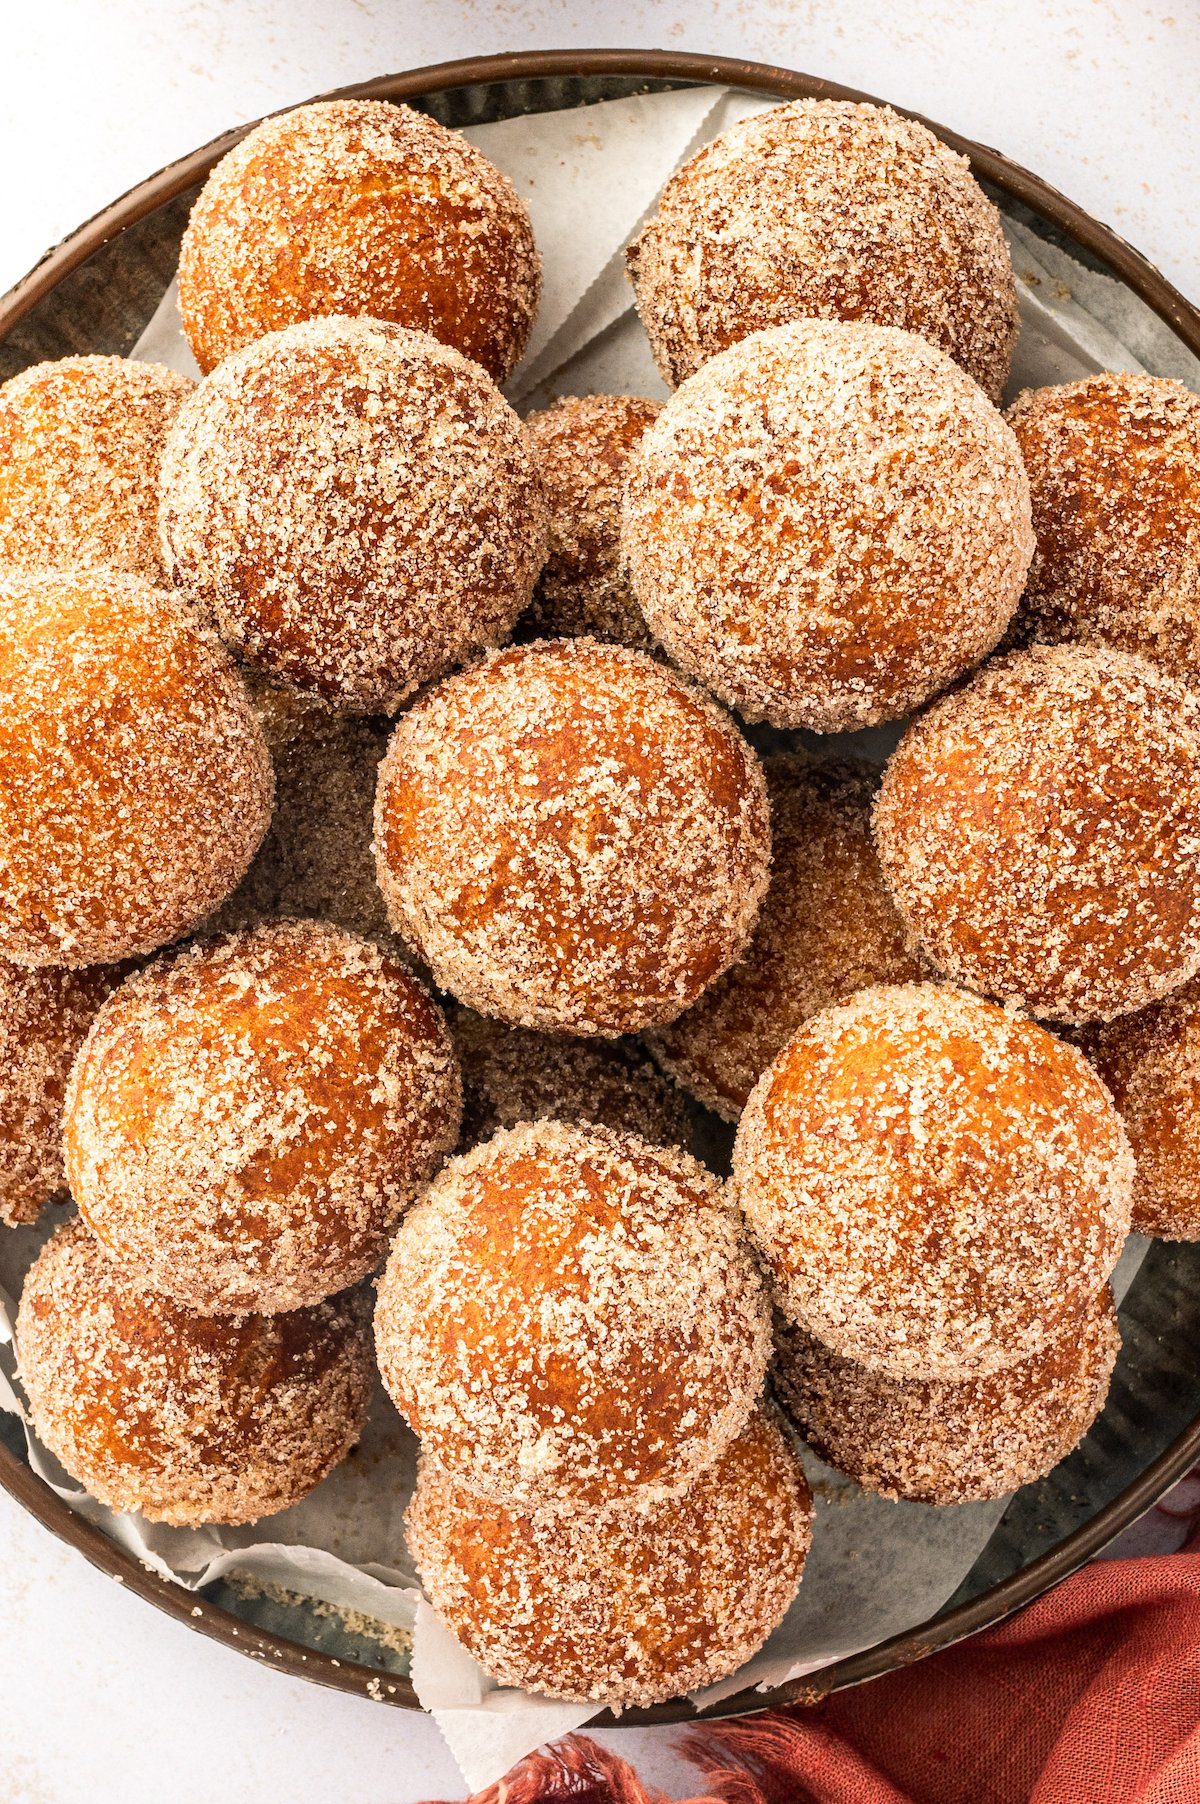 A serving plate filled with homemade donut holes tossed in sweet cinnamon sugar.